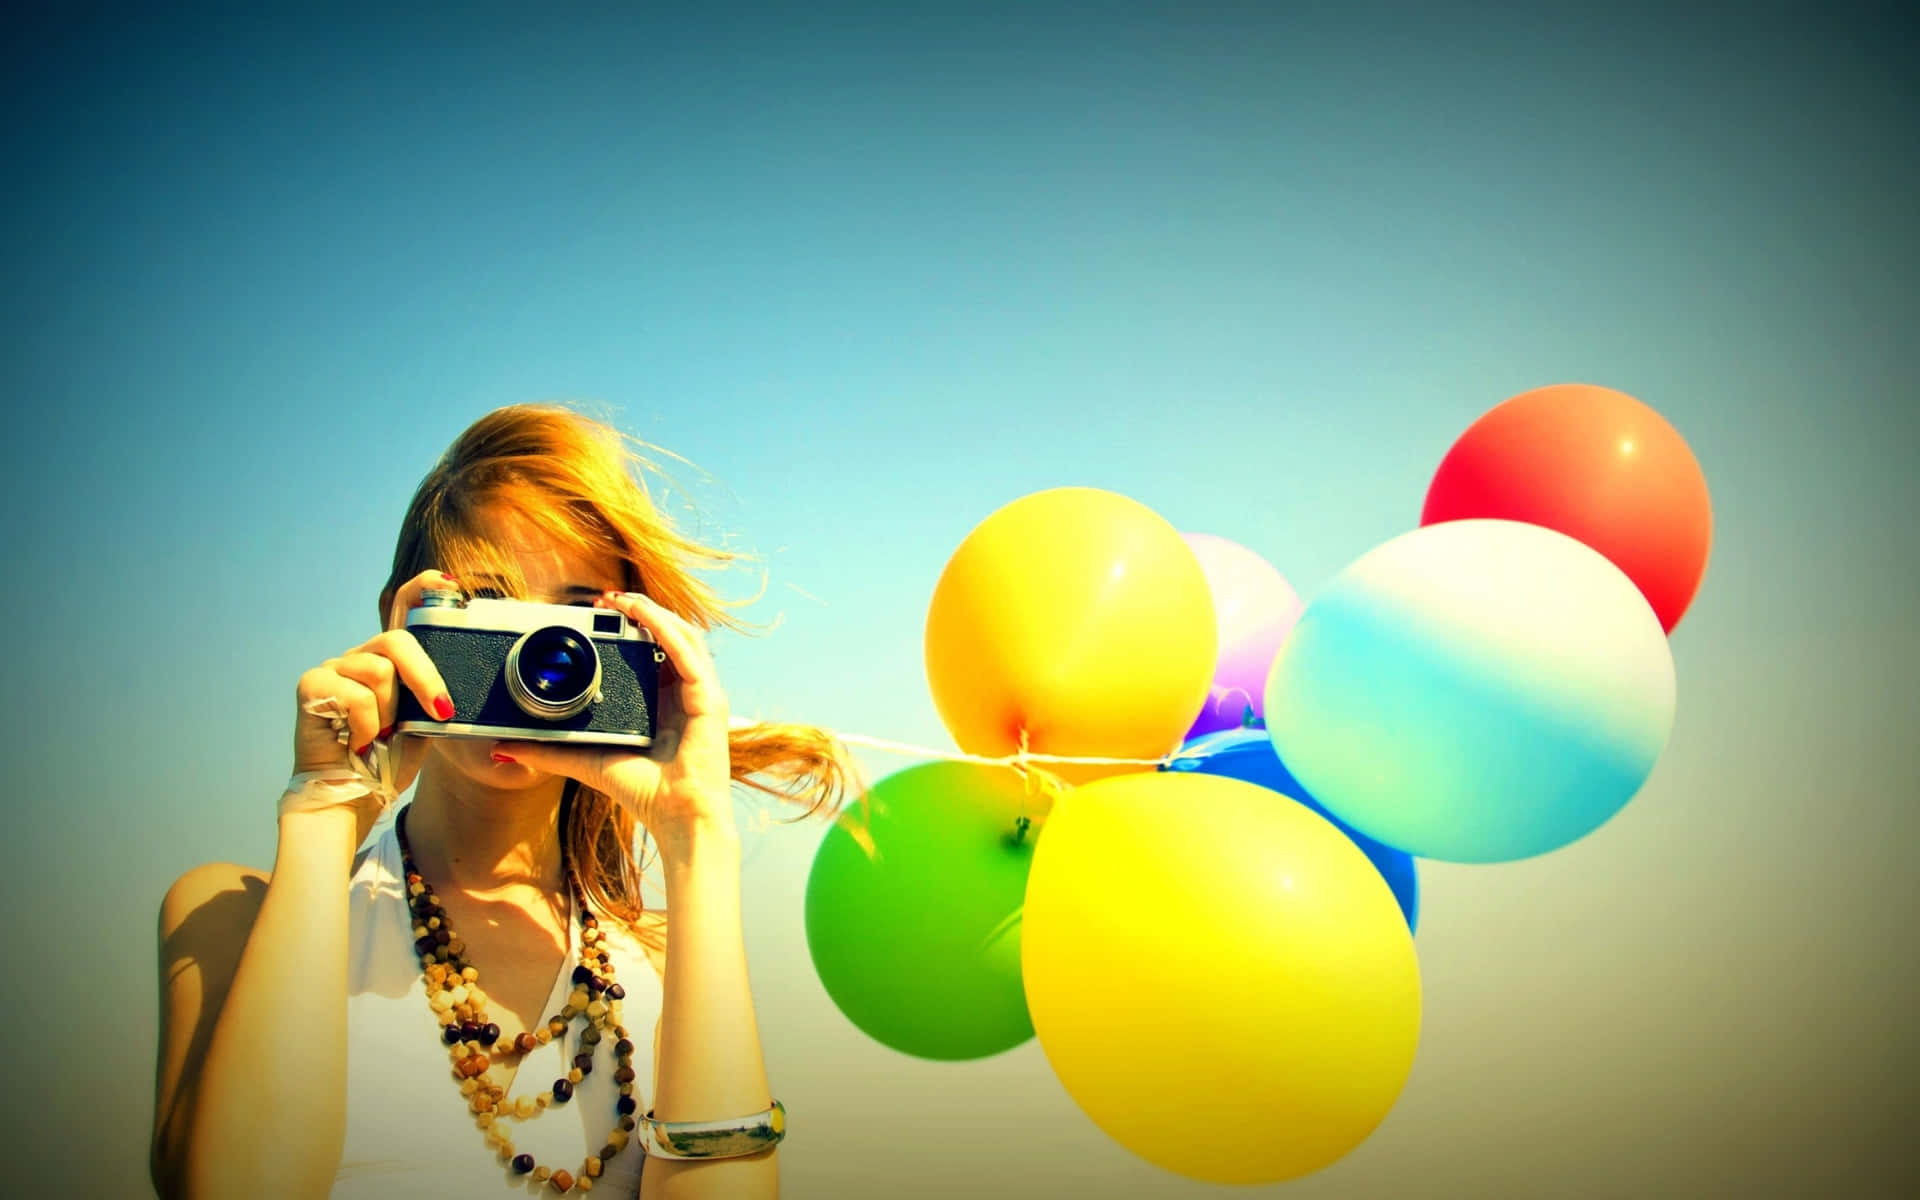 Balloons Background Woman With A Camera And Balloons Background